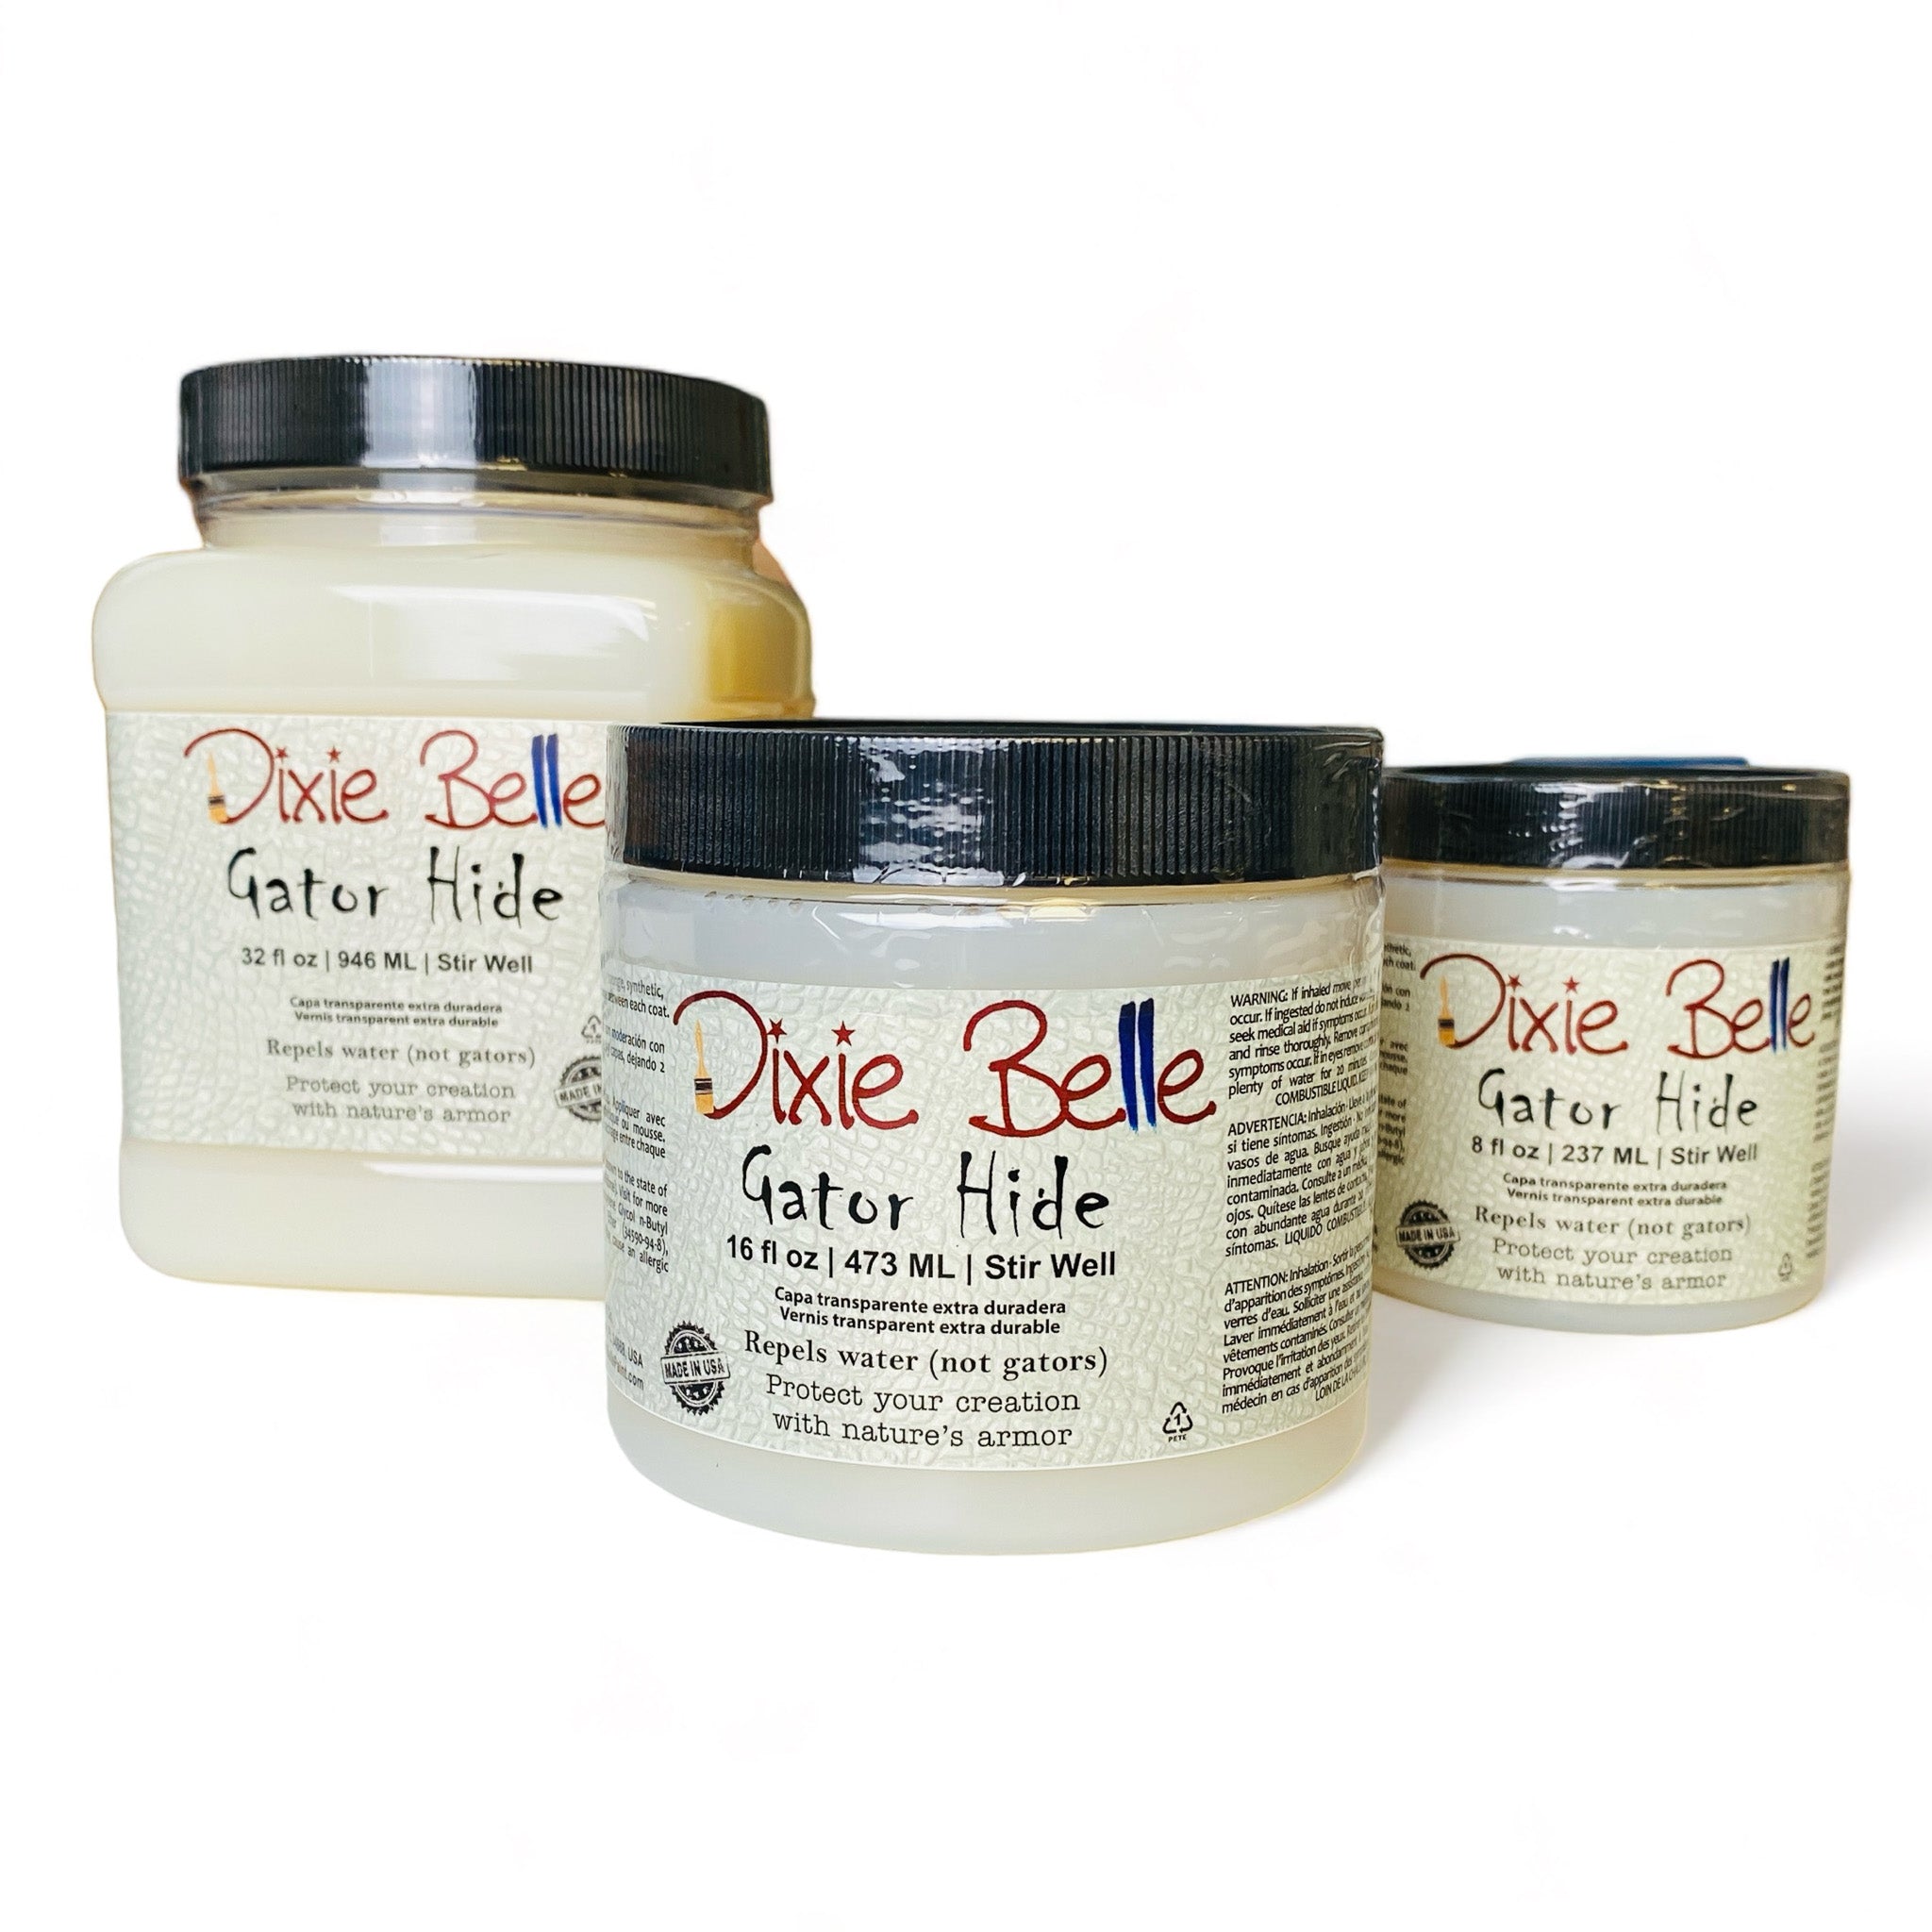 Three containers of Dixie Belle Paint Company's Gator Hide in 3 sizes (32, 16, and 8 fluid ounces) are against a white background.